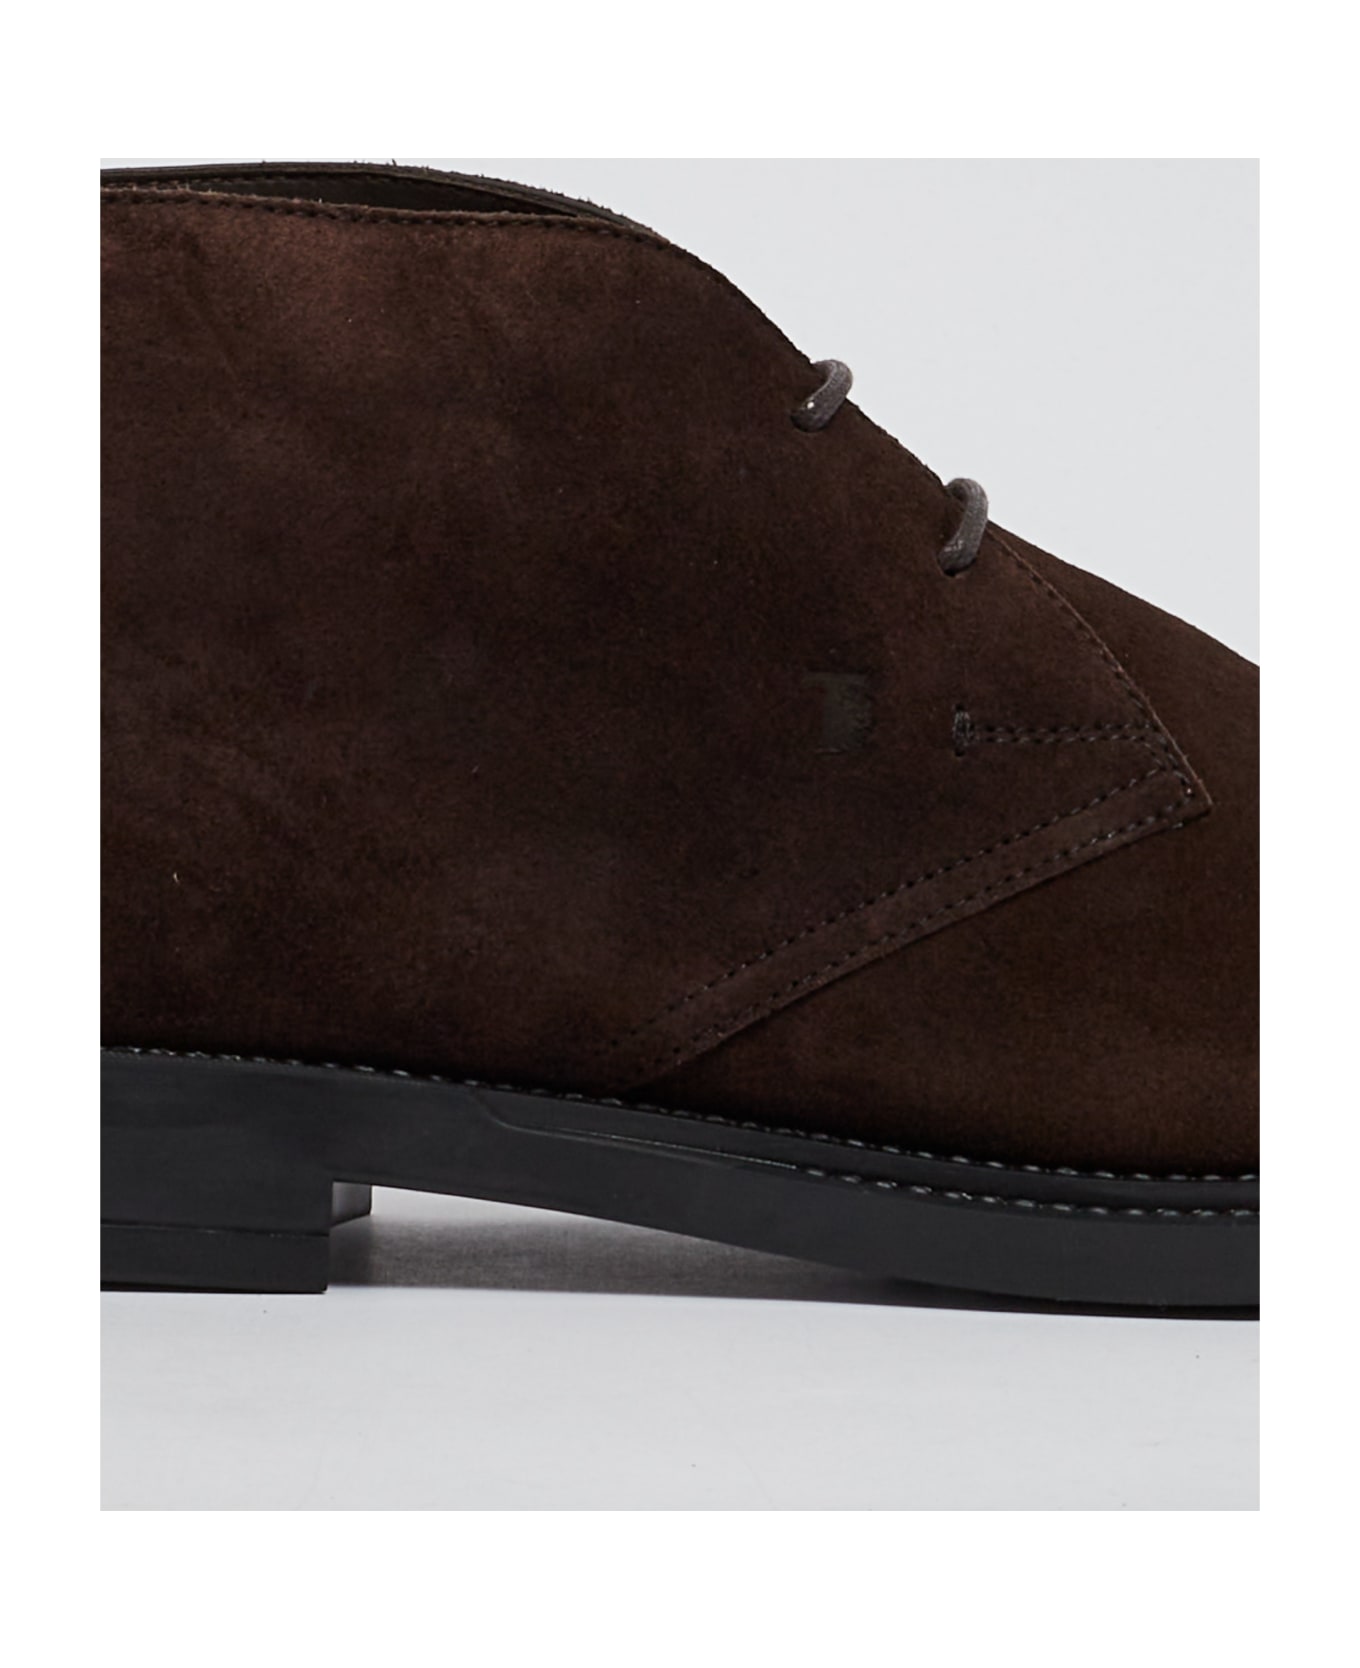 Tod's Lace-up Formal Desert Boots - TESTA DI MORO